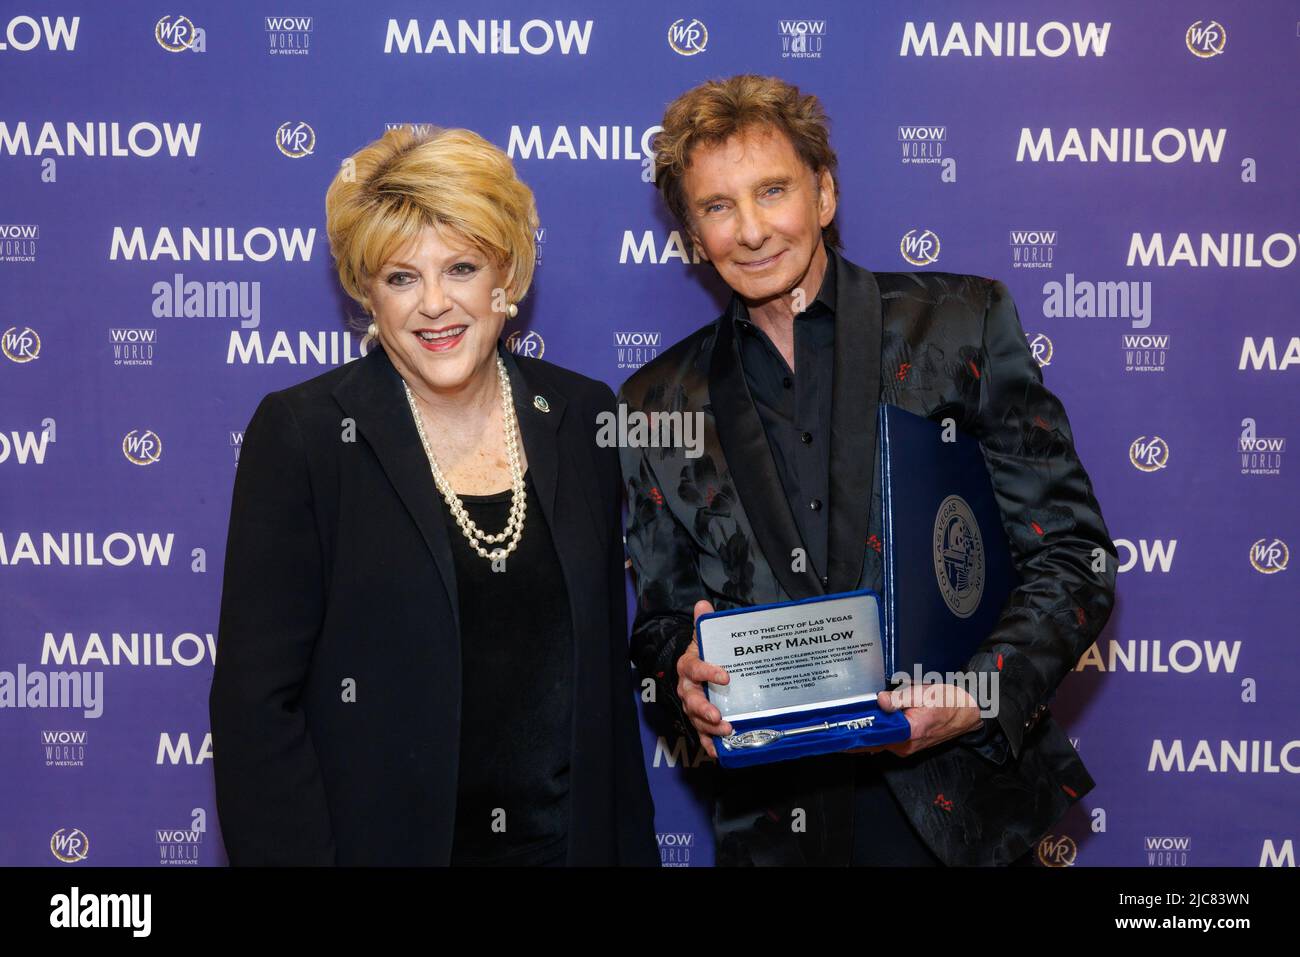 Las Vegas, NV, USA. 10th June, 2022. ***HOUSE COVERAGE*** Mayor Carolyn G. Goodman and Barry Manilow pictured as Mayor Carolyn G. Goodman presents the Key to the City of Las Vegas to Barry Manilow in a private ceremony following his performance in the International Theater at Westgate Las Vegas in Las vegas, NV on June 10, 2022. Credit: Gdp Photos/Media Punch/Alamy Live News Stock Photo